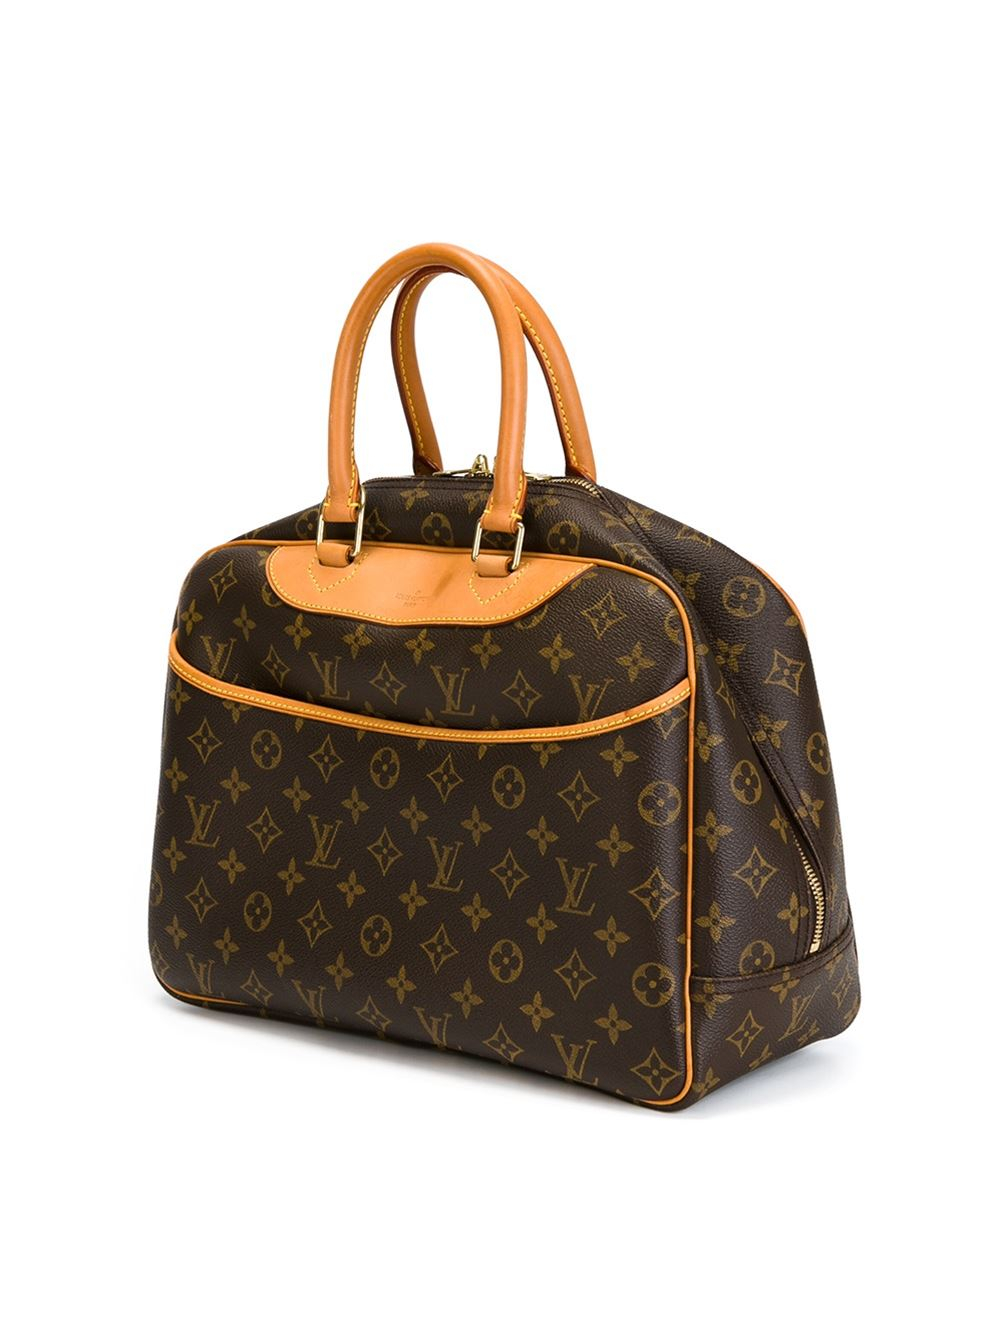 Lyst - Louis Vuitton 'Deauville' Luggage Bag in Brown